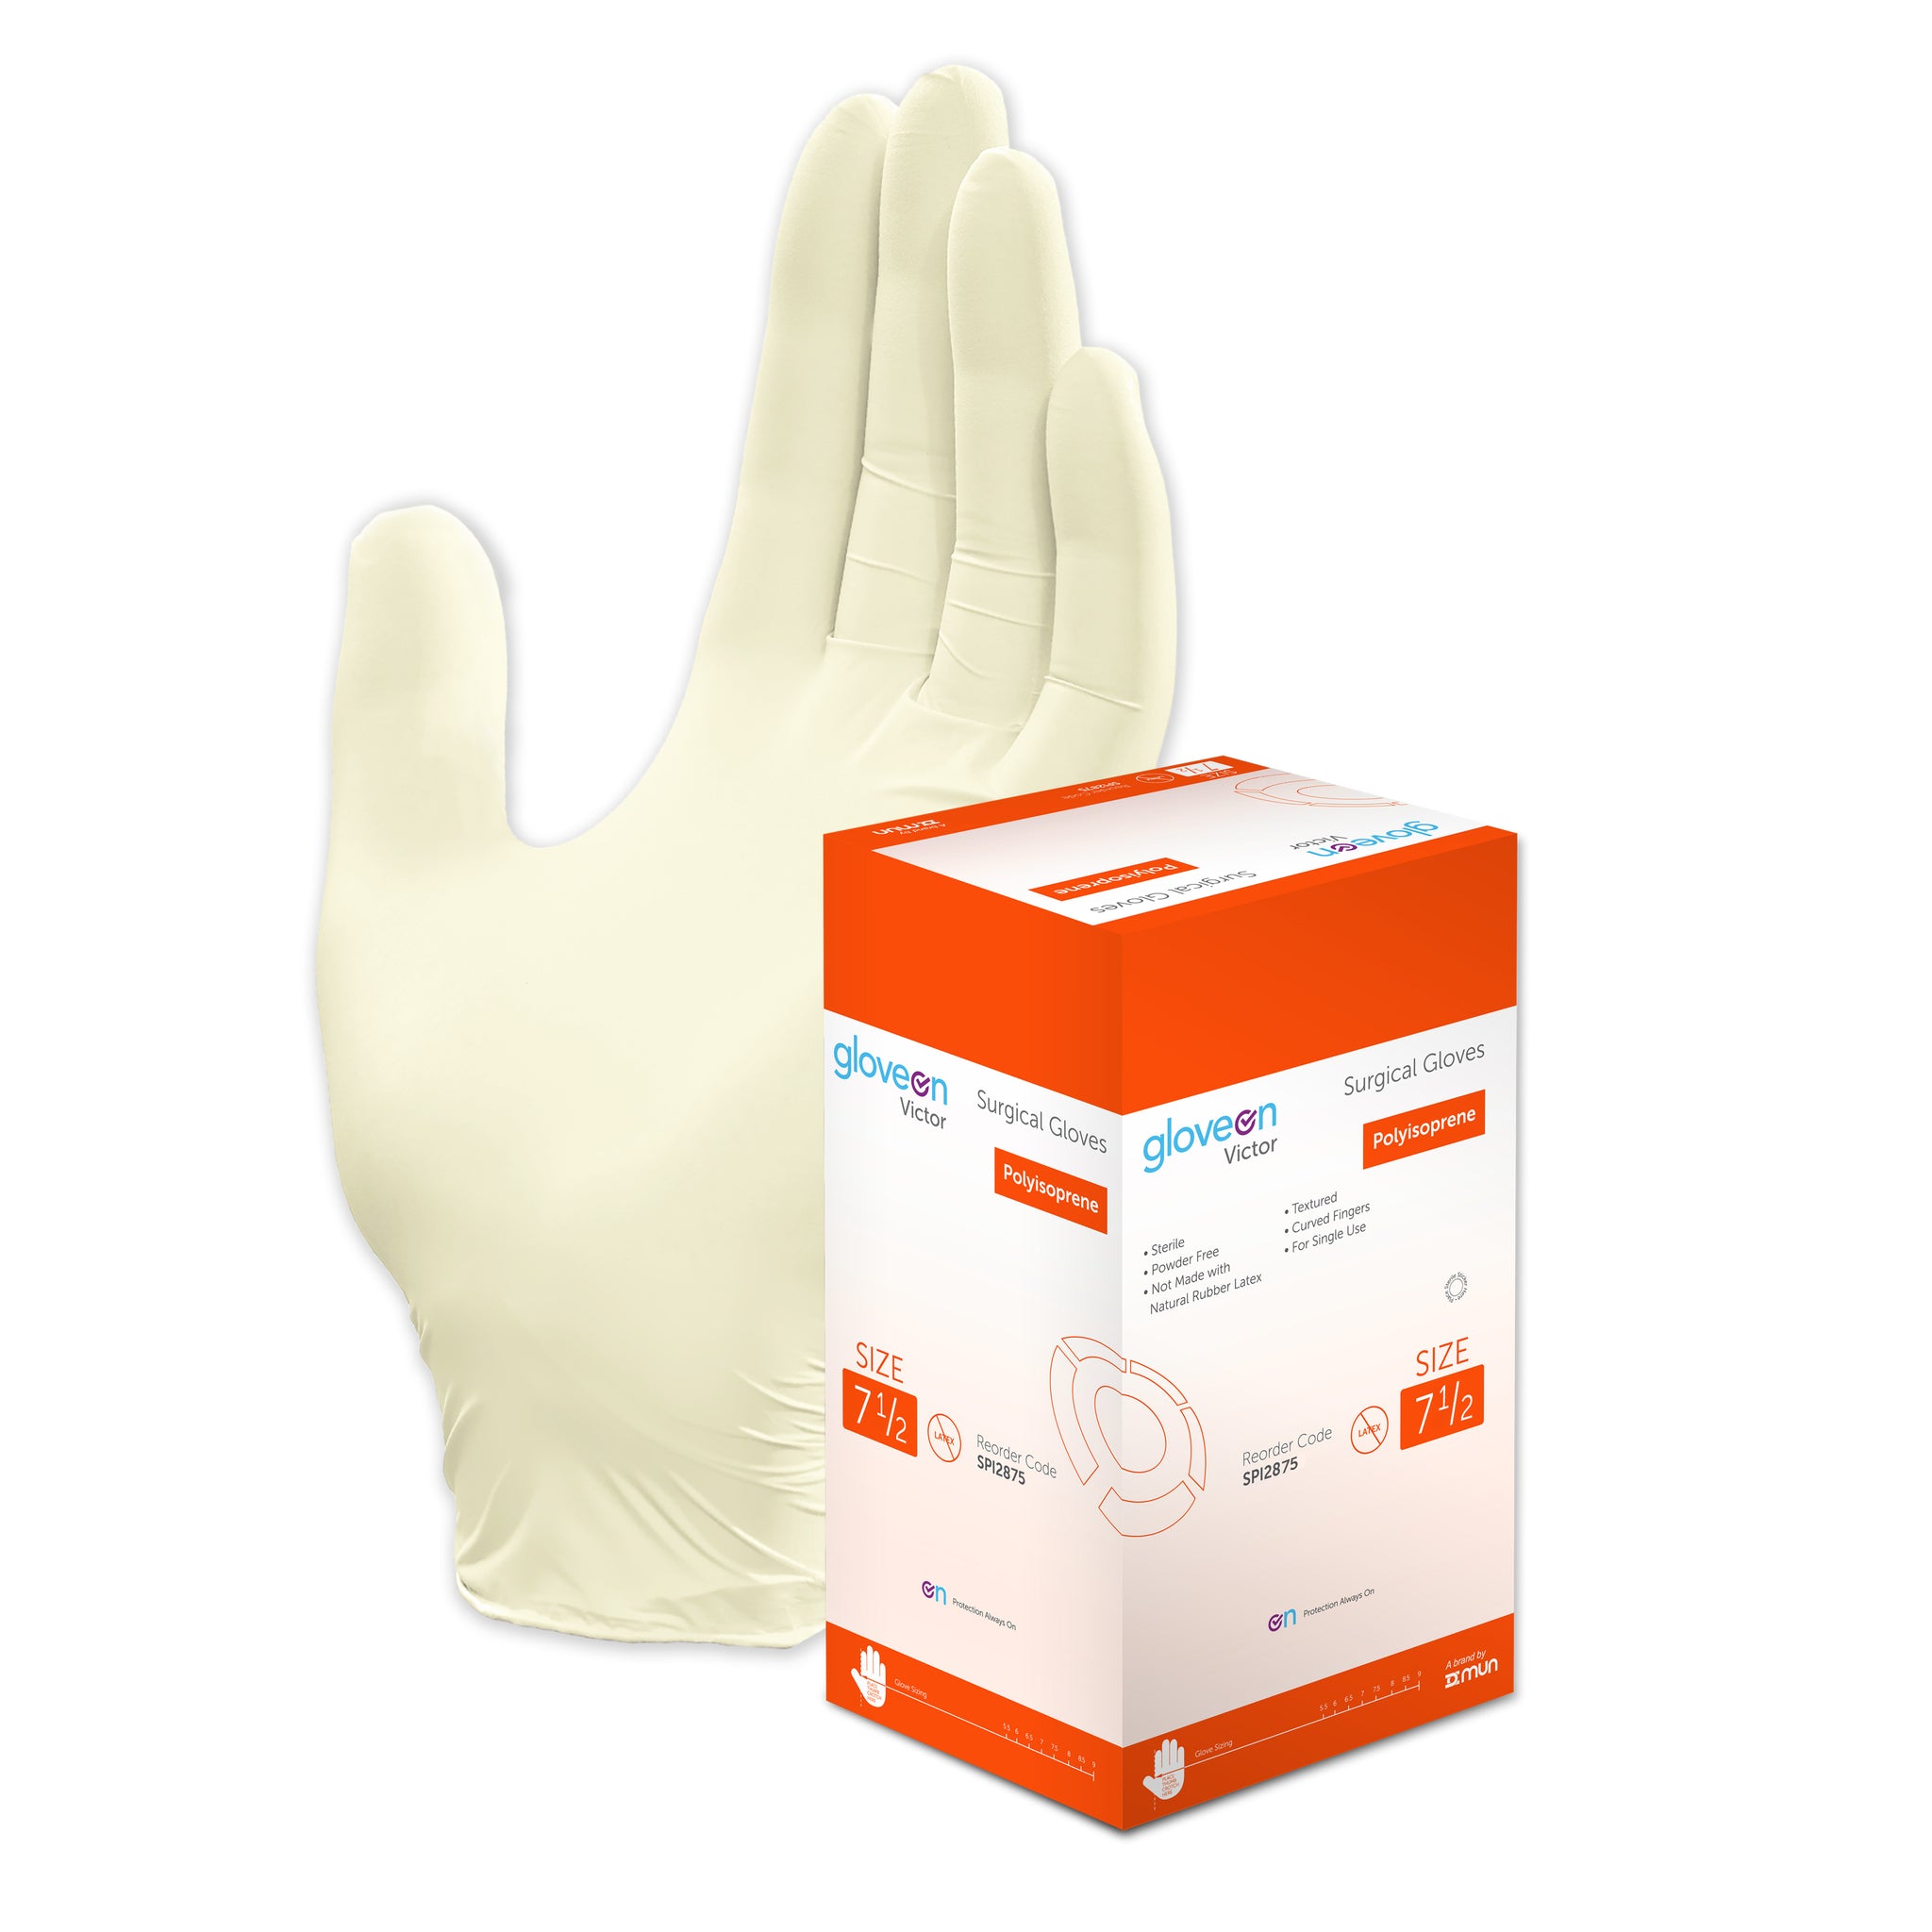 Polyisoprene, Powder Free, Textured, Curved Fingers, Sterile, White - Box of 100, 7.5